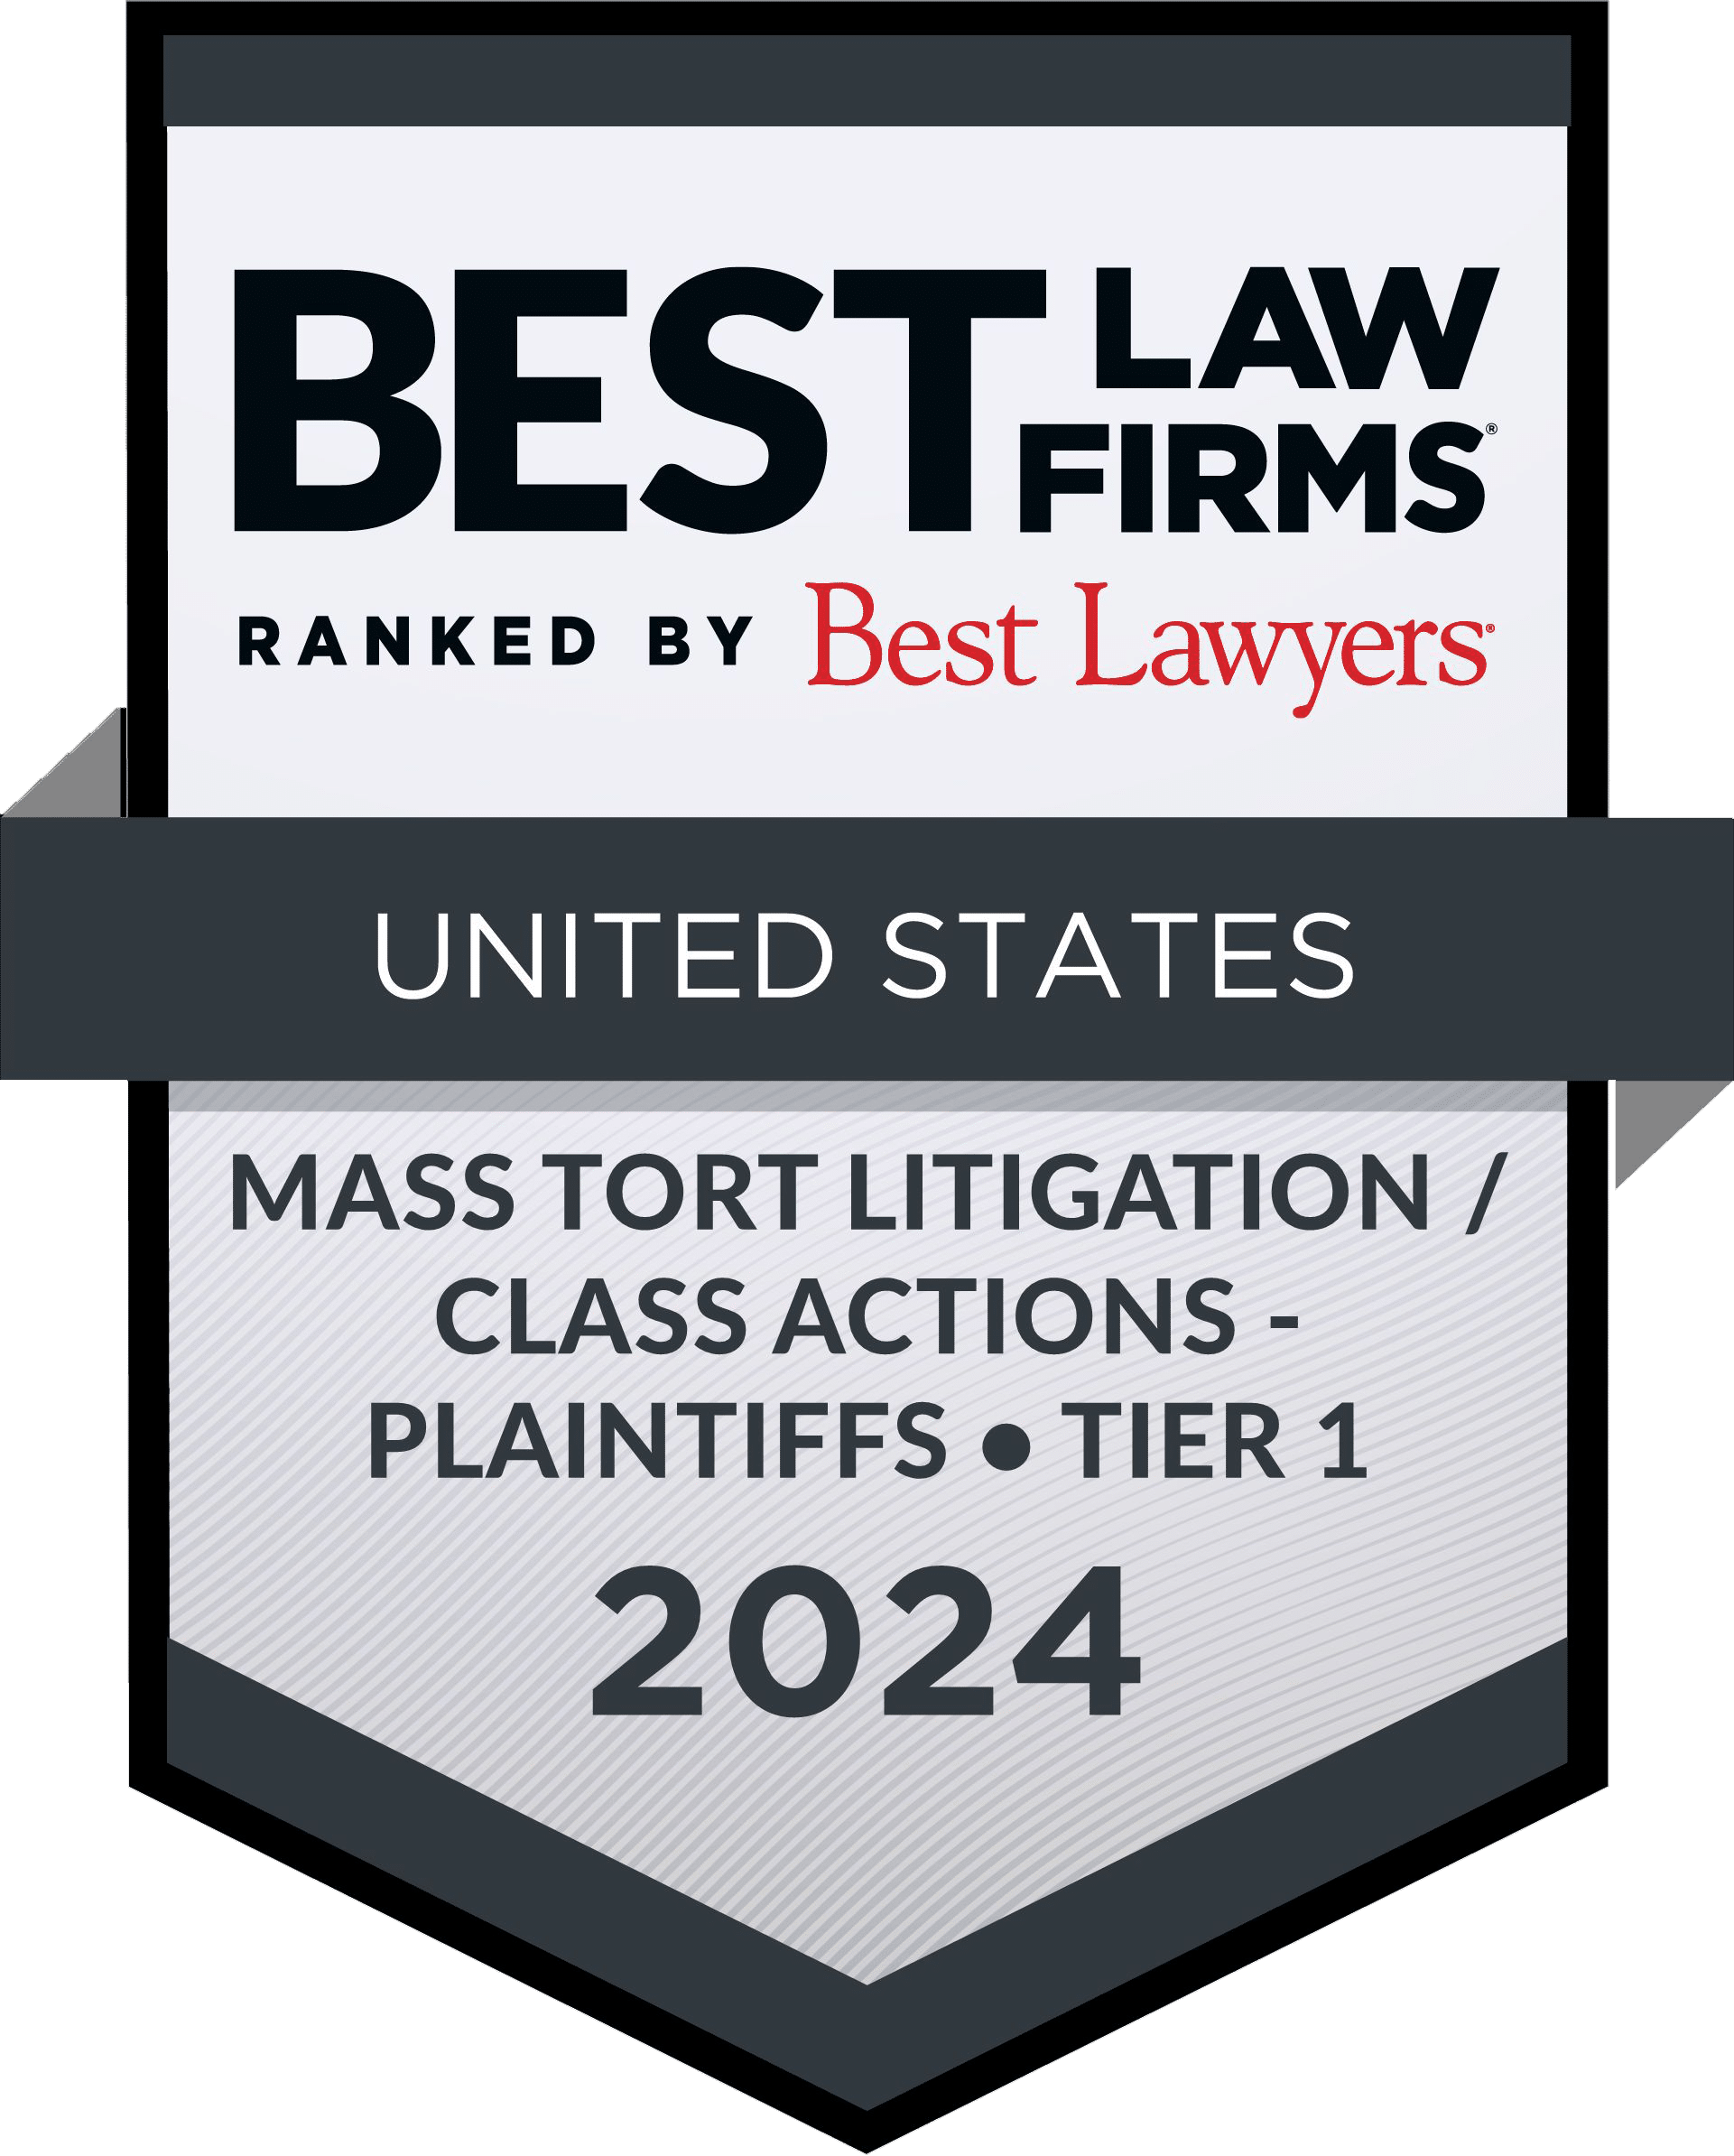 Best Law Firms - 2024